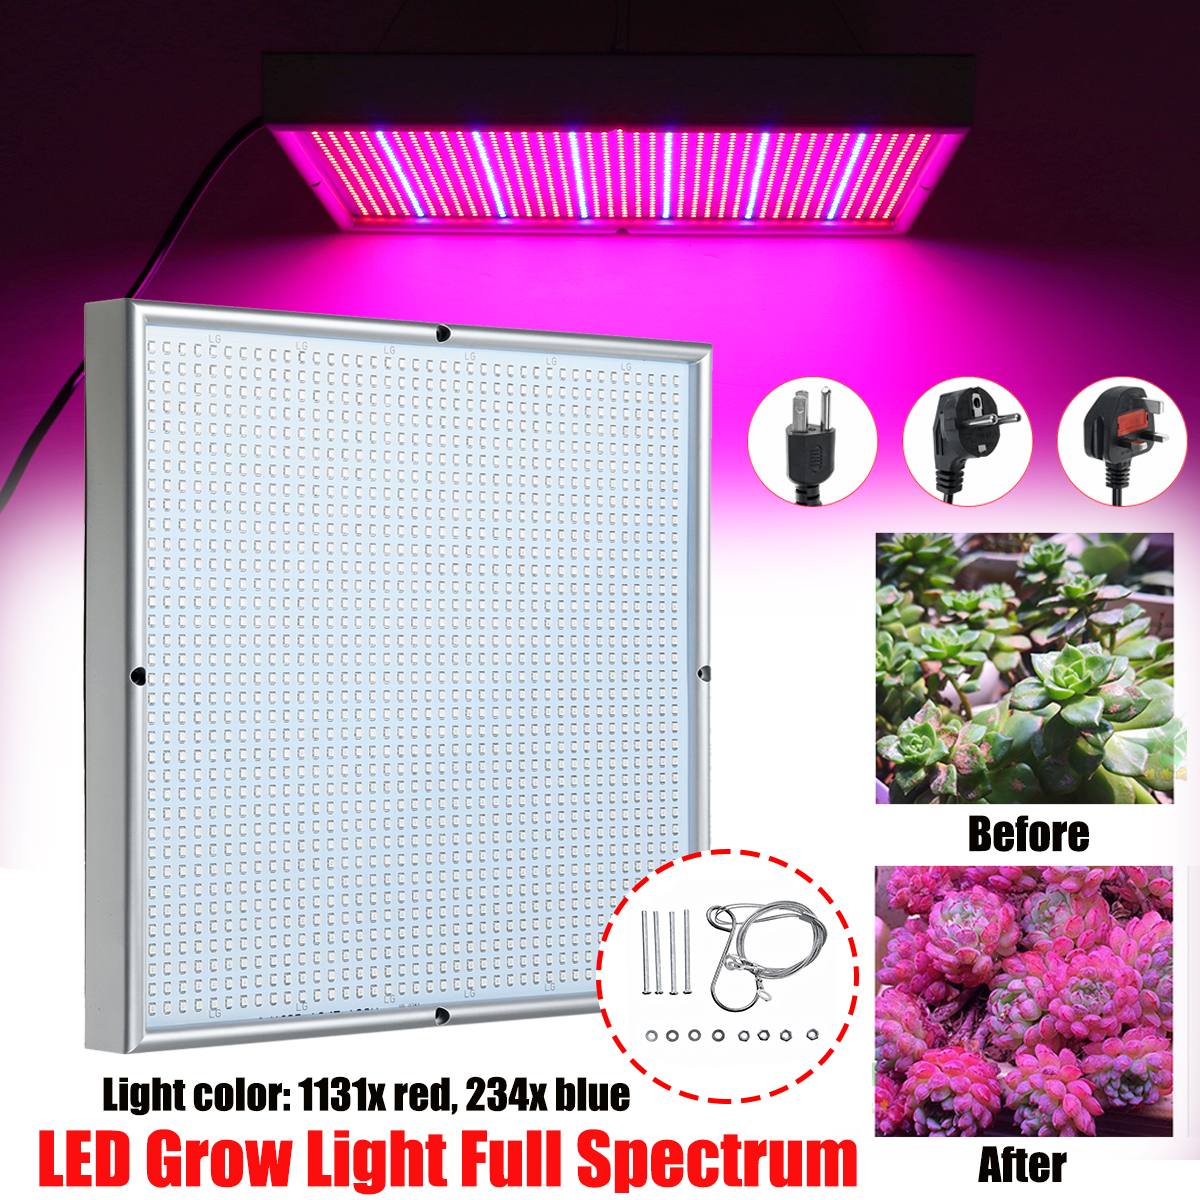 1365-LED-Plant-Lights-Square-Hanging-Wire-Plant-Growth-Lights-Greenhouse-Vegetable-Lamp-for-Gowing-P-1675545-1